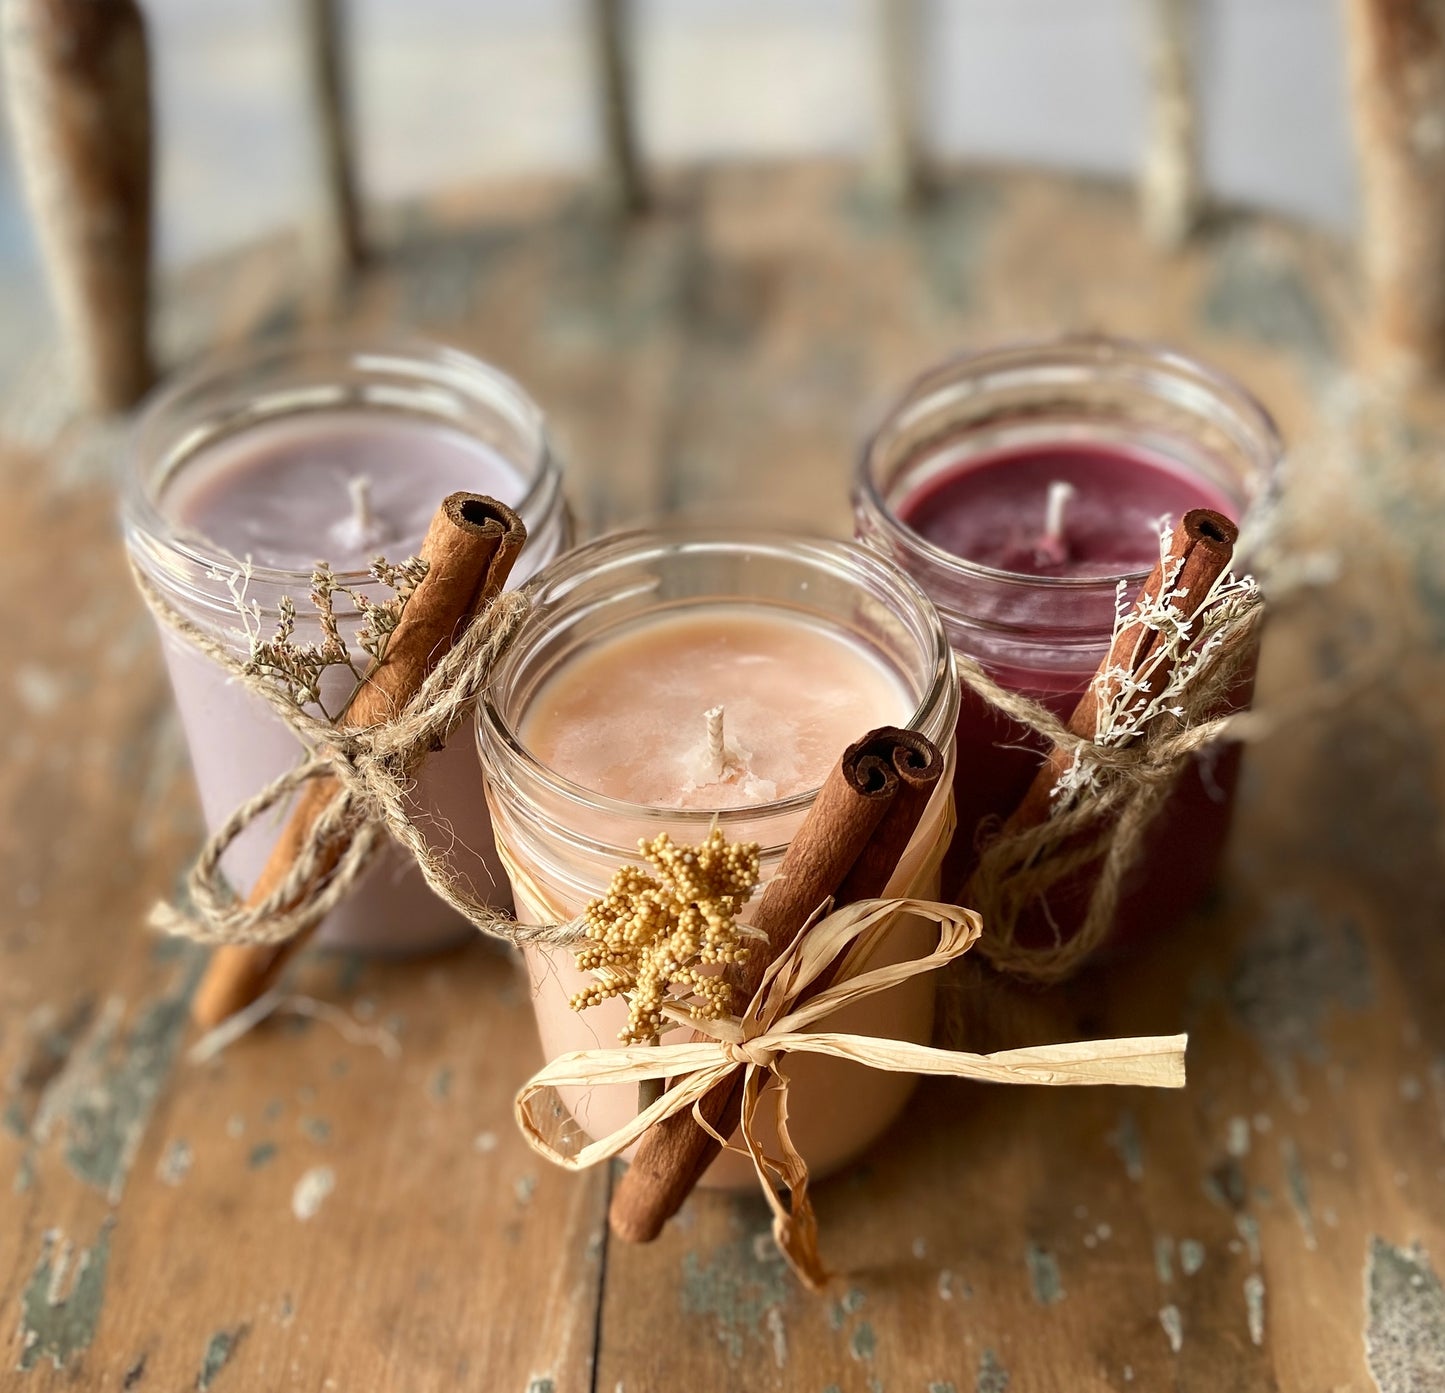 Candle Making Workshop: Fall Scents . Wednesday September 27 . Hartman's Distilling Co.